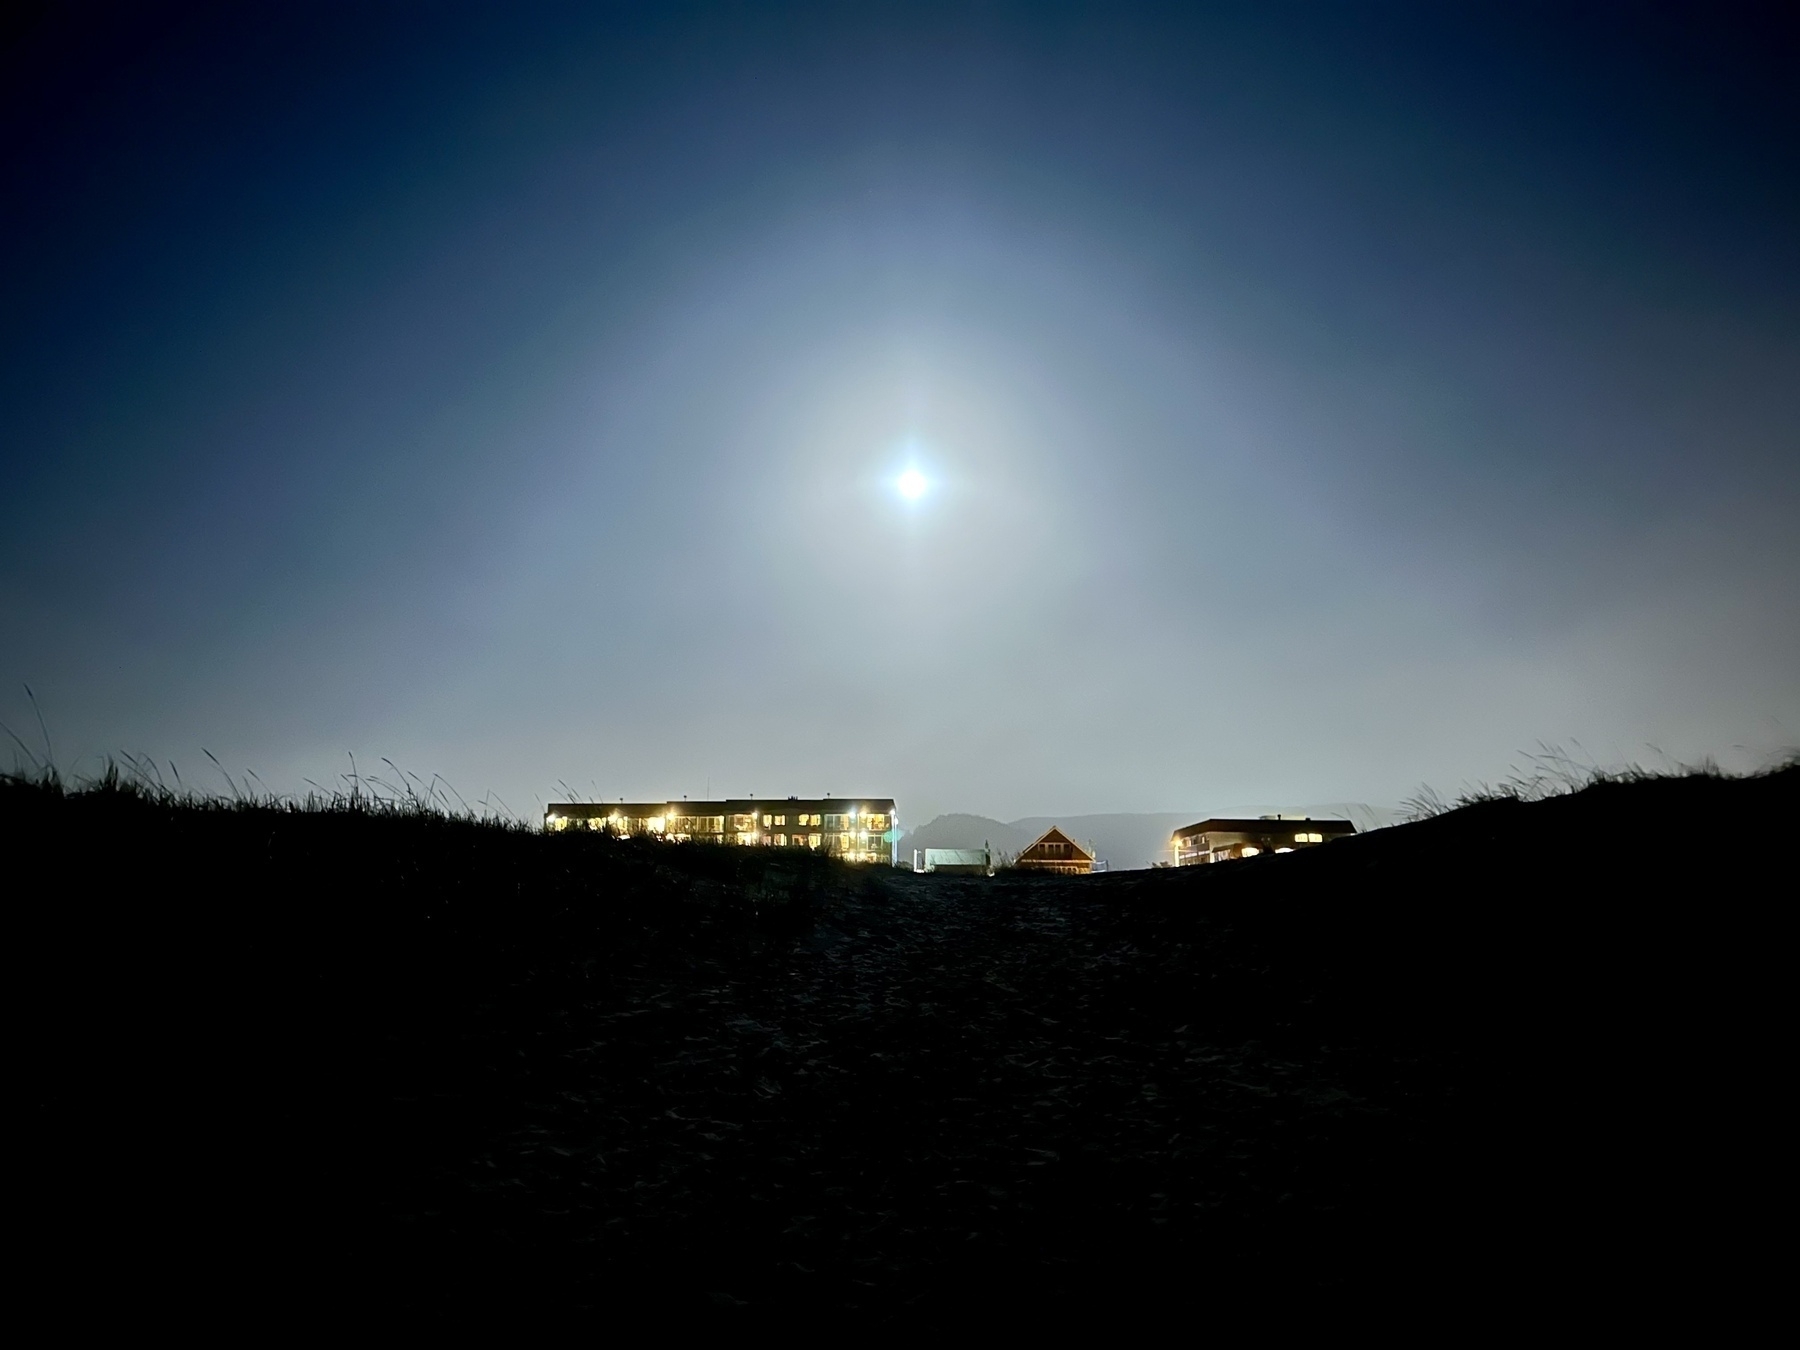 A dark coastal scene looking inland of sand dunes, and a bright, nearly full moon rising above some low-rise hotels. 